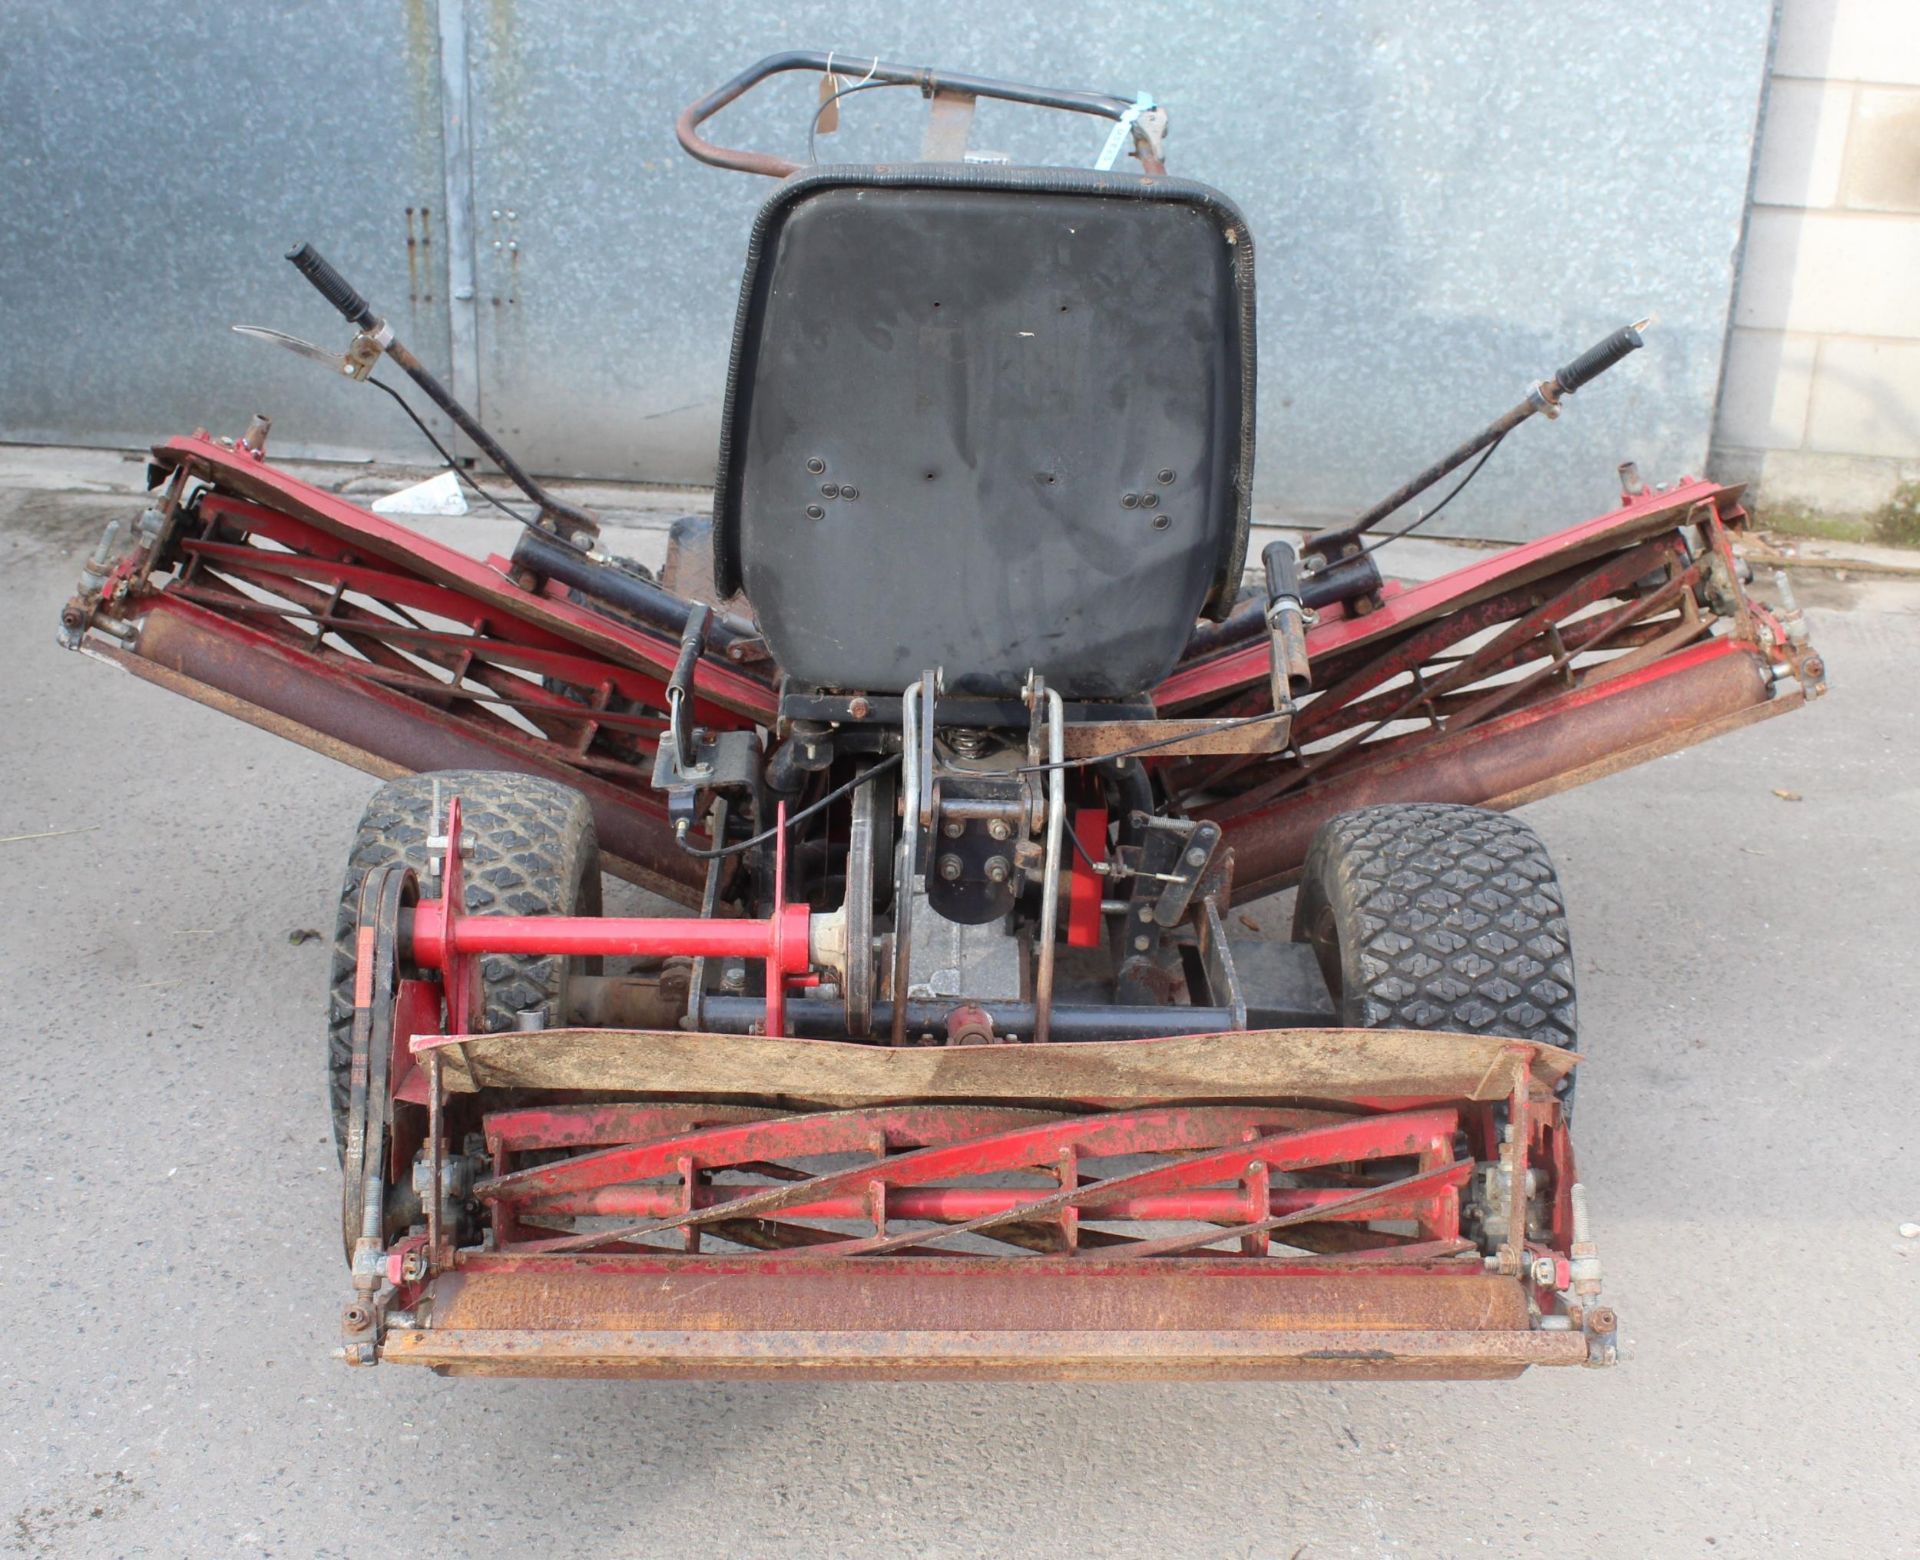 BARONES LM1800 RIDE ON GANG MOWER WITH SUBARU ENGINE + VAT - Image 3 of 3